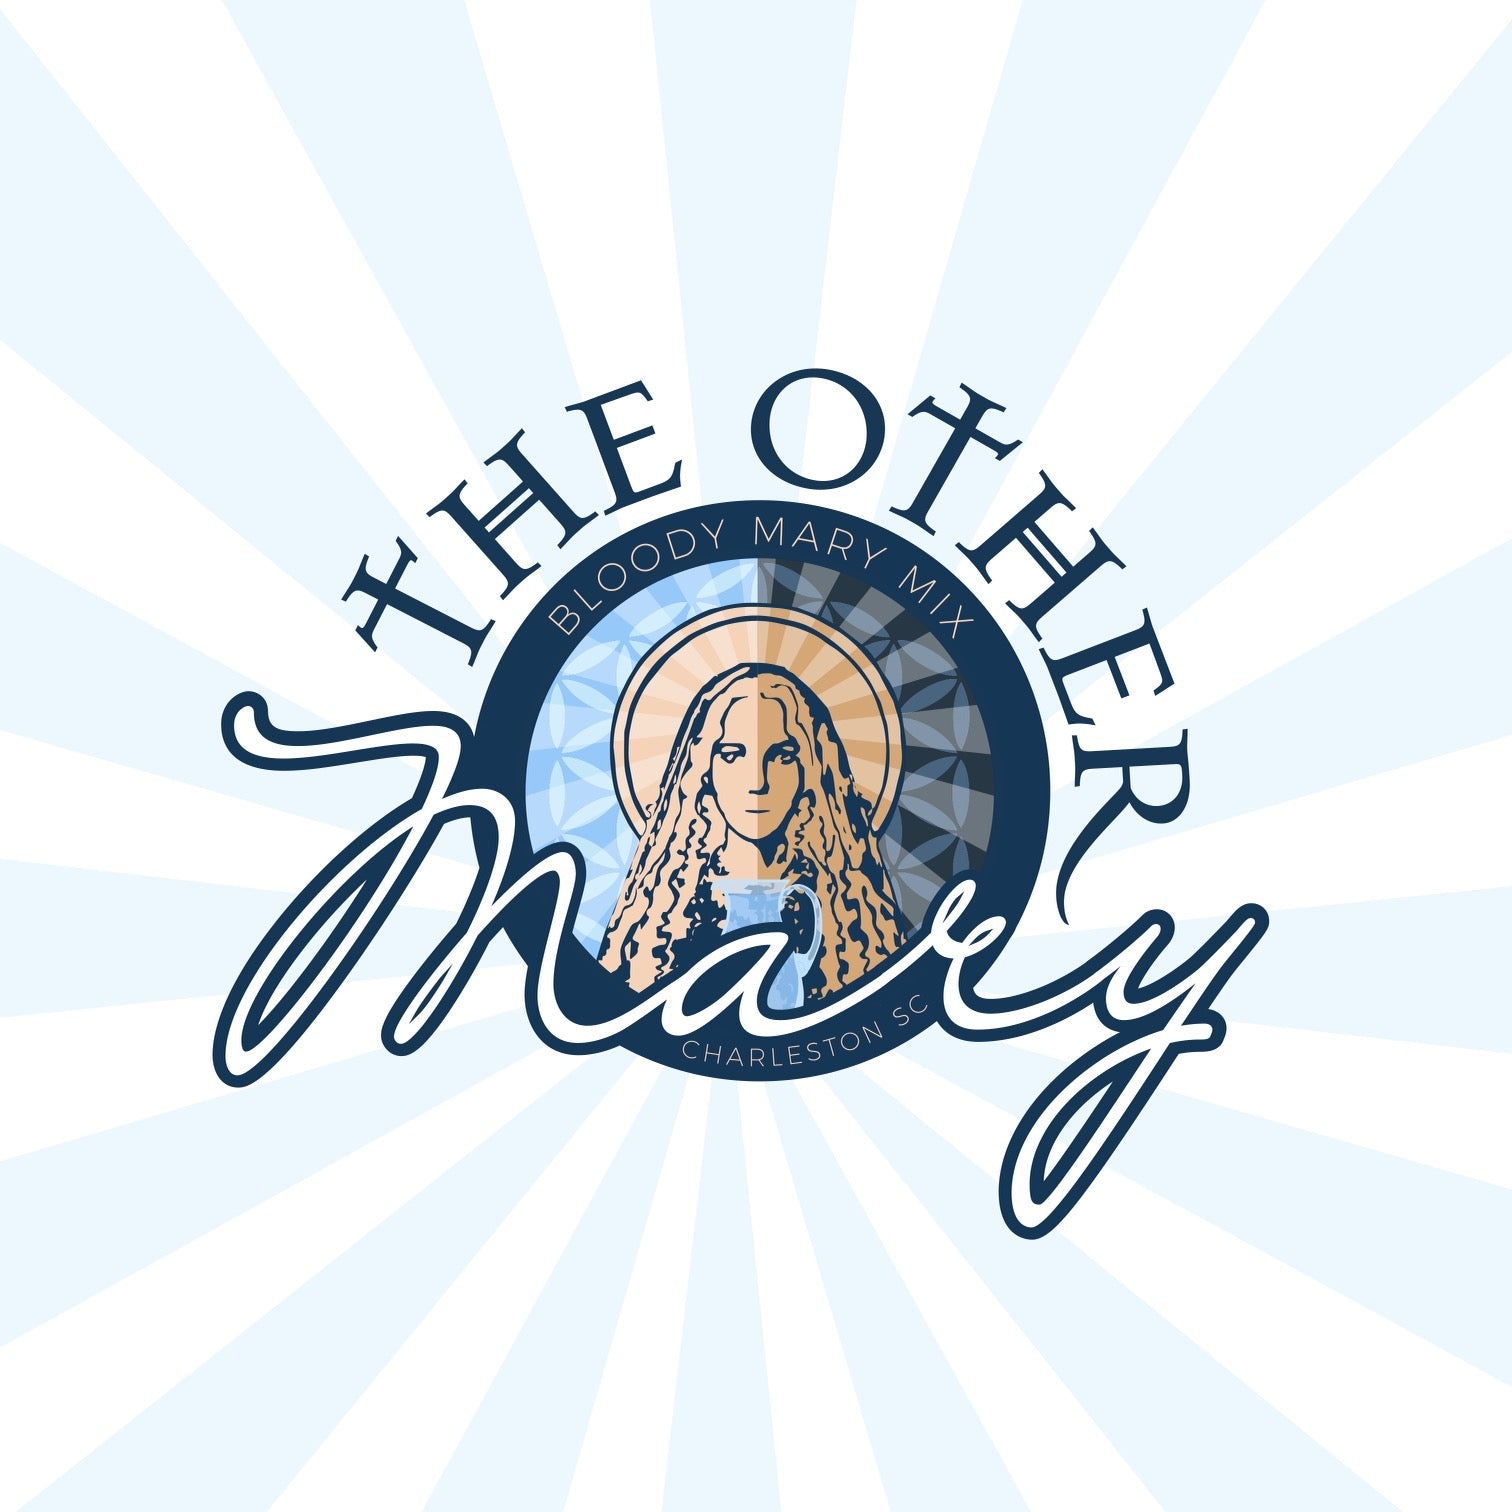 The Other Mary Mix - Pluff Mud Mercantile